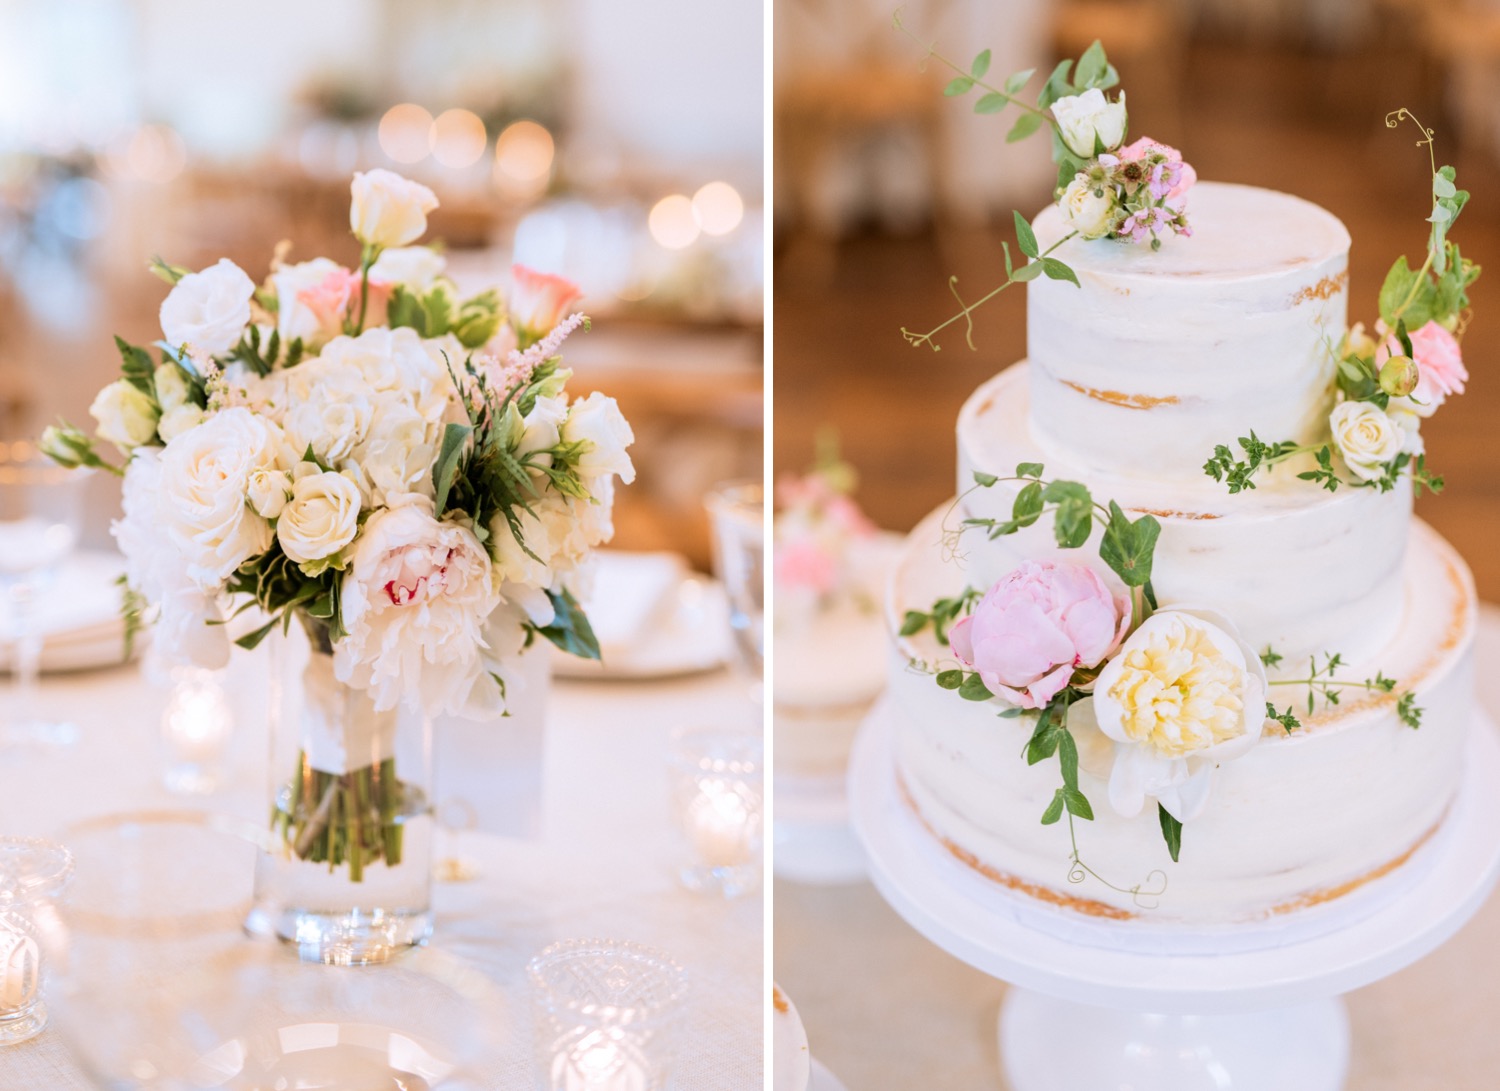 Wedding details, set up, and florals and cake during wedding reception at King Family Vineyards in Charlottesville, VA